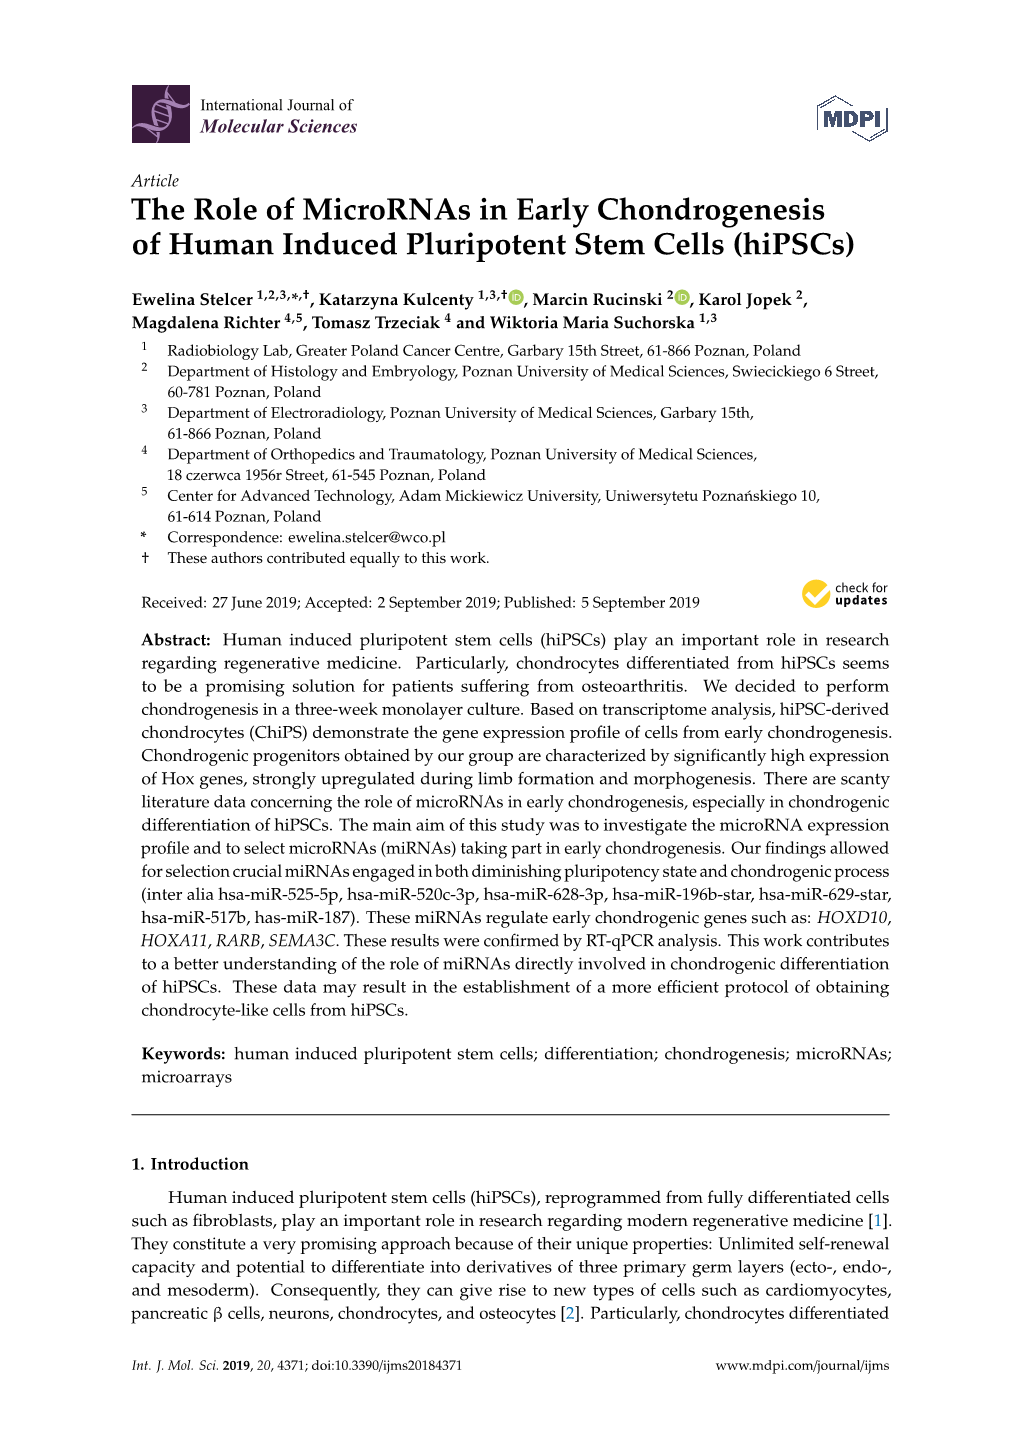 The Role of Micrornas in Early Chondrogenesis of Human Induced Pluripotent Stem Cells (Hipscs)